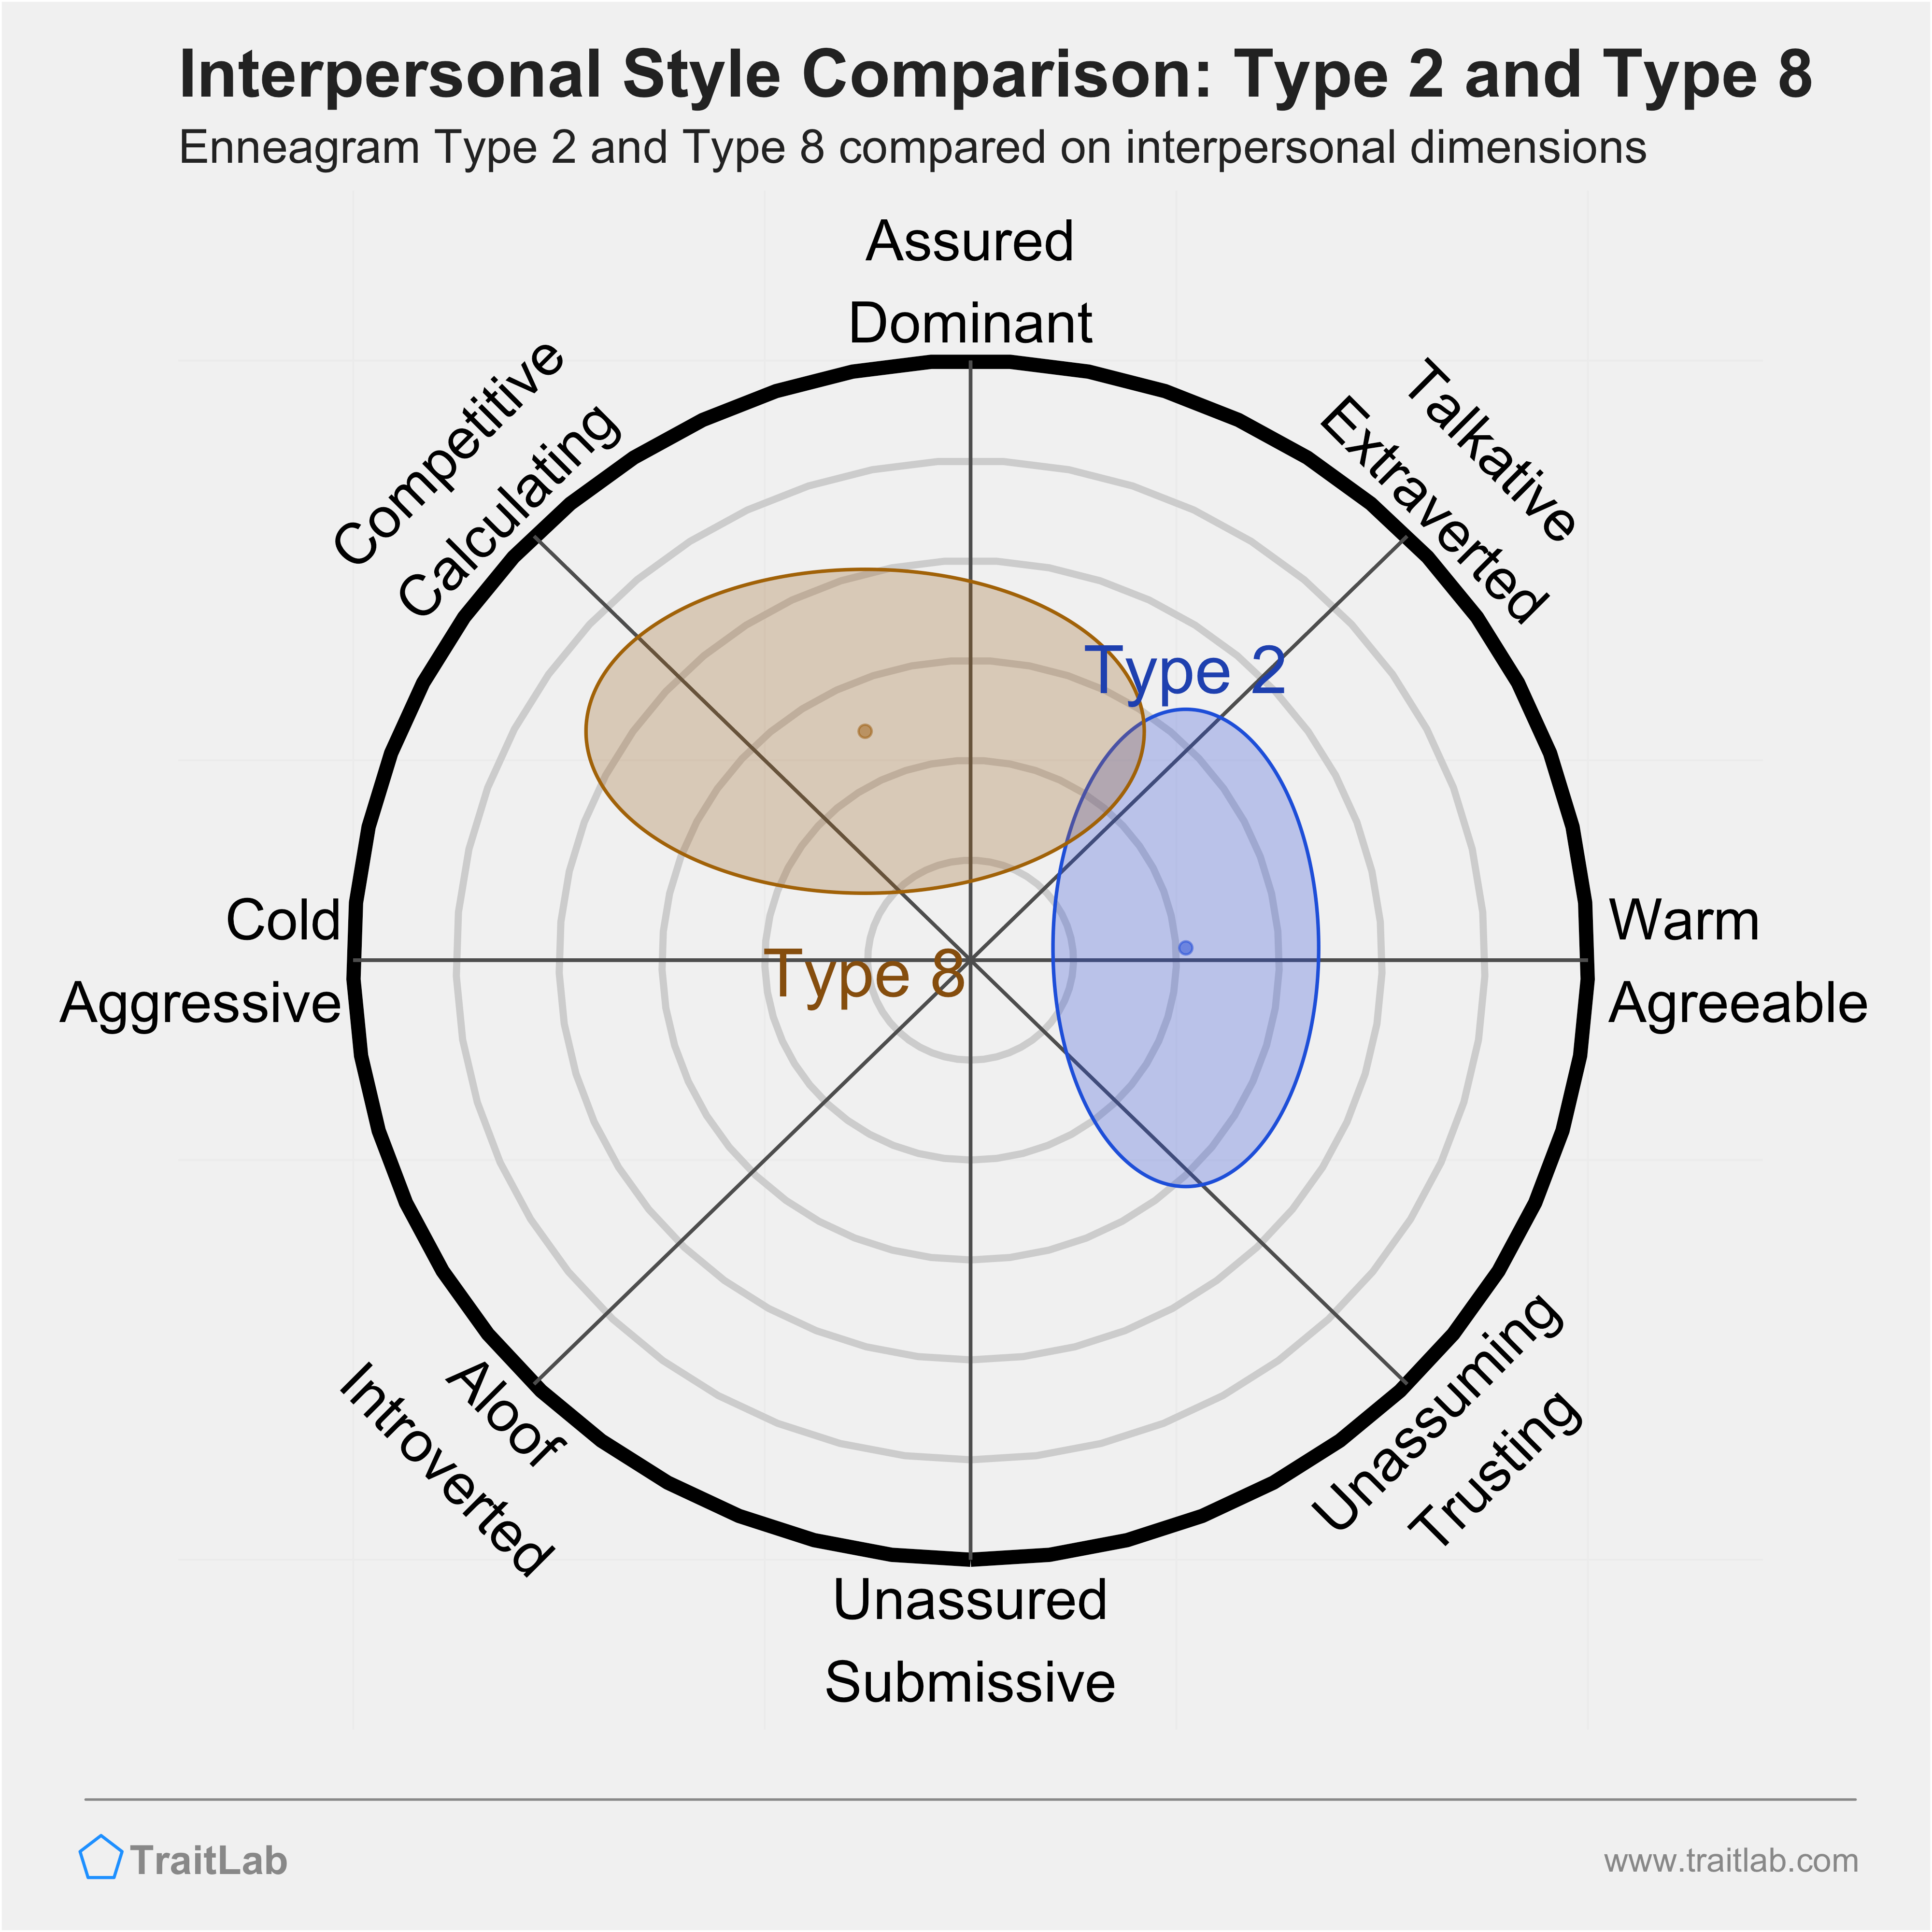 Enneagram Type 2 and Type 8 comparison across interpersonal dimensions